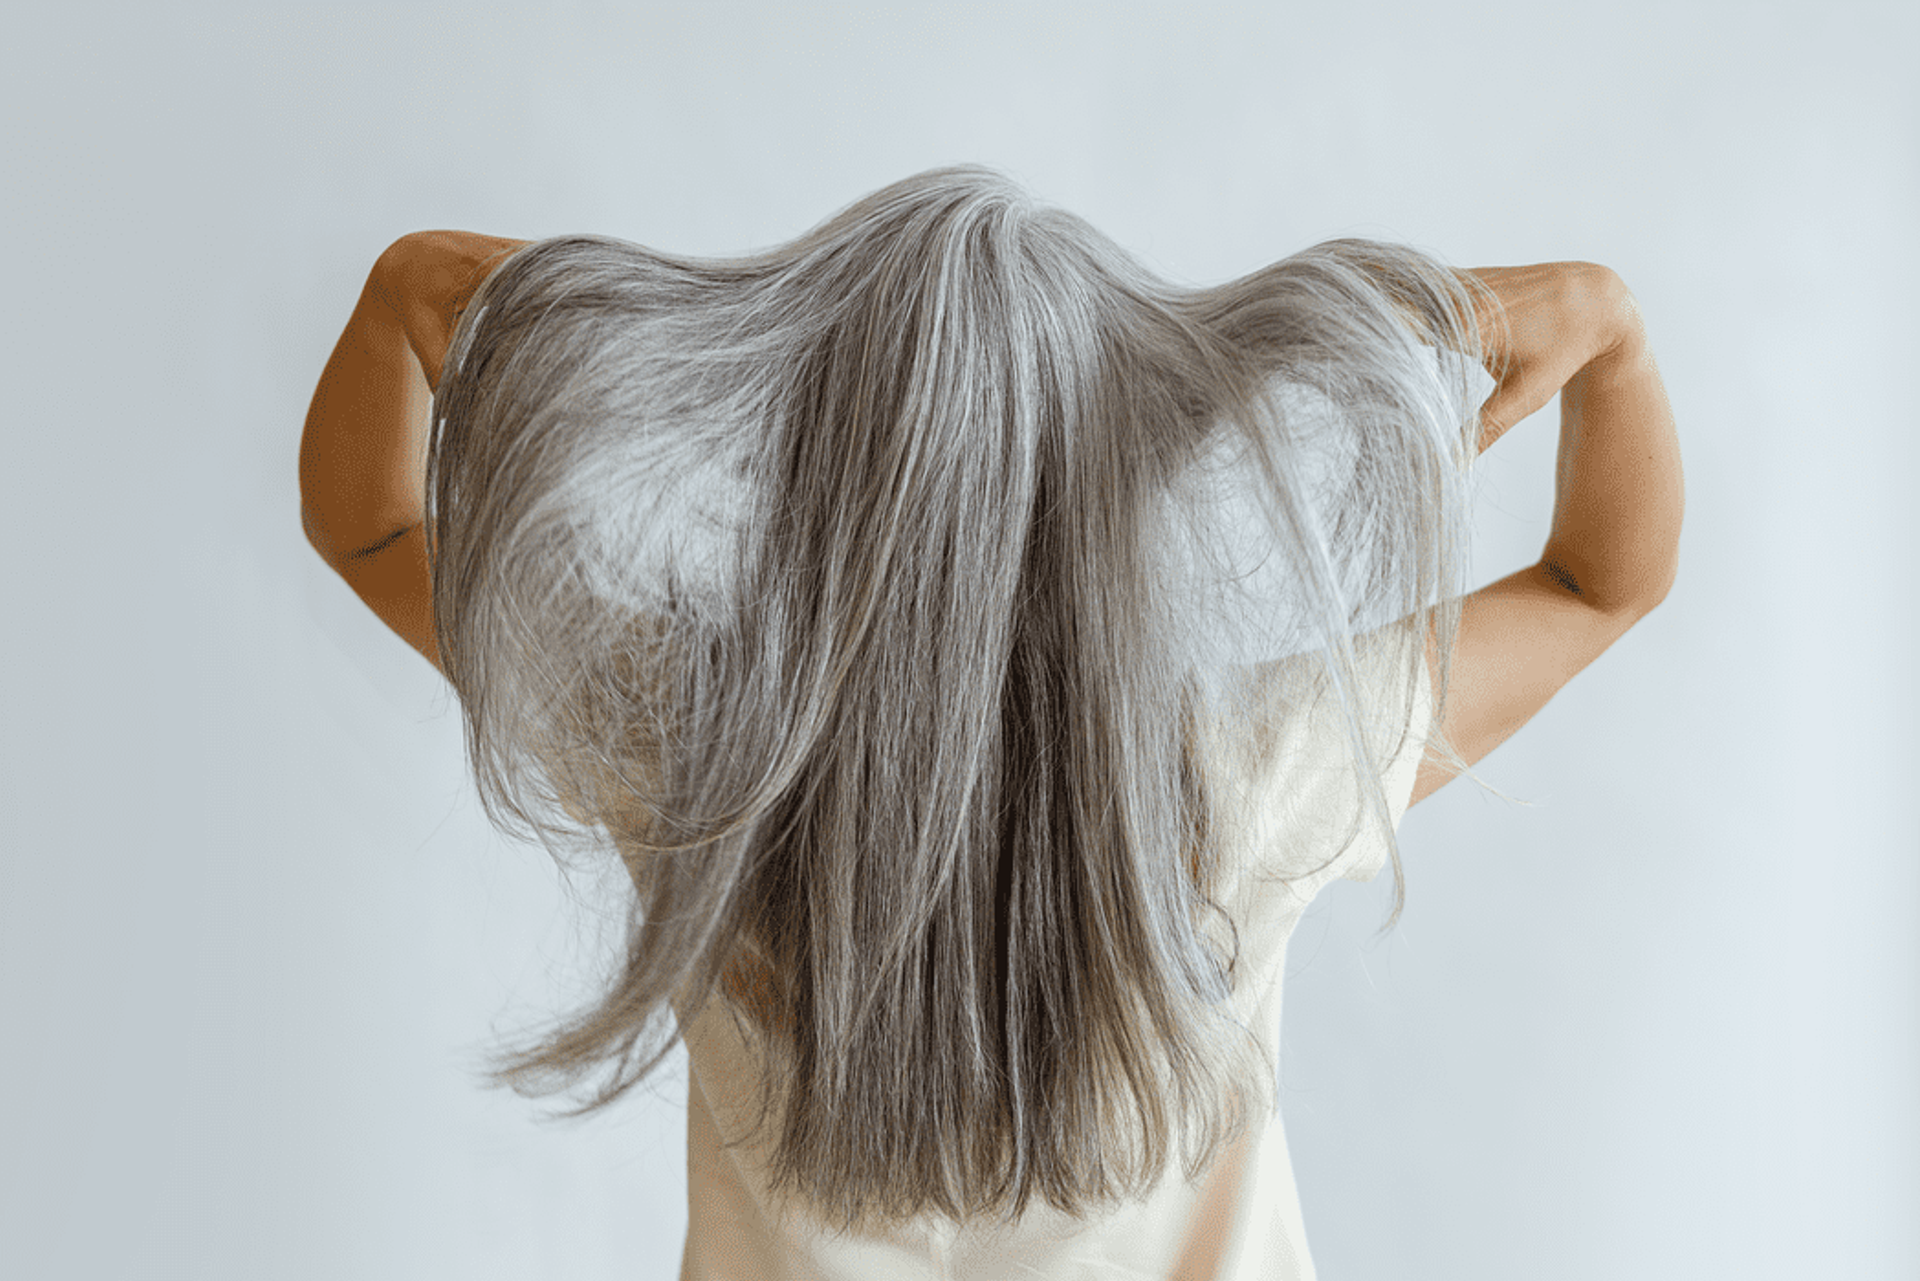 Photo of a the back of a woman's hair, long grey strands with hands lifting it at the sides